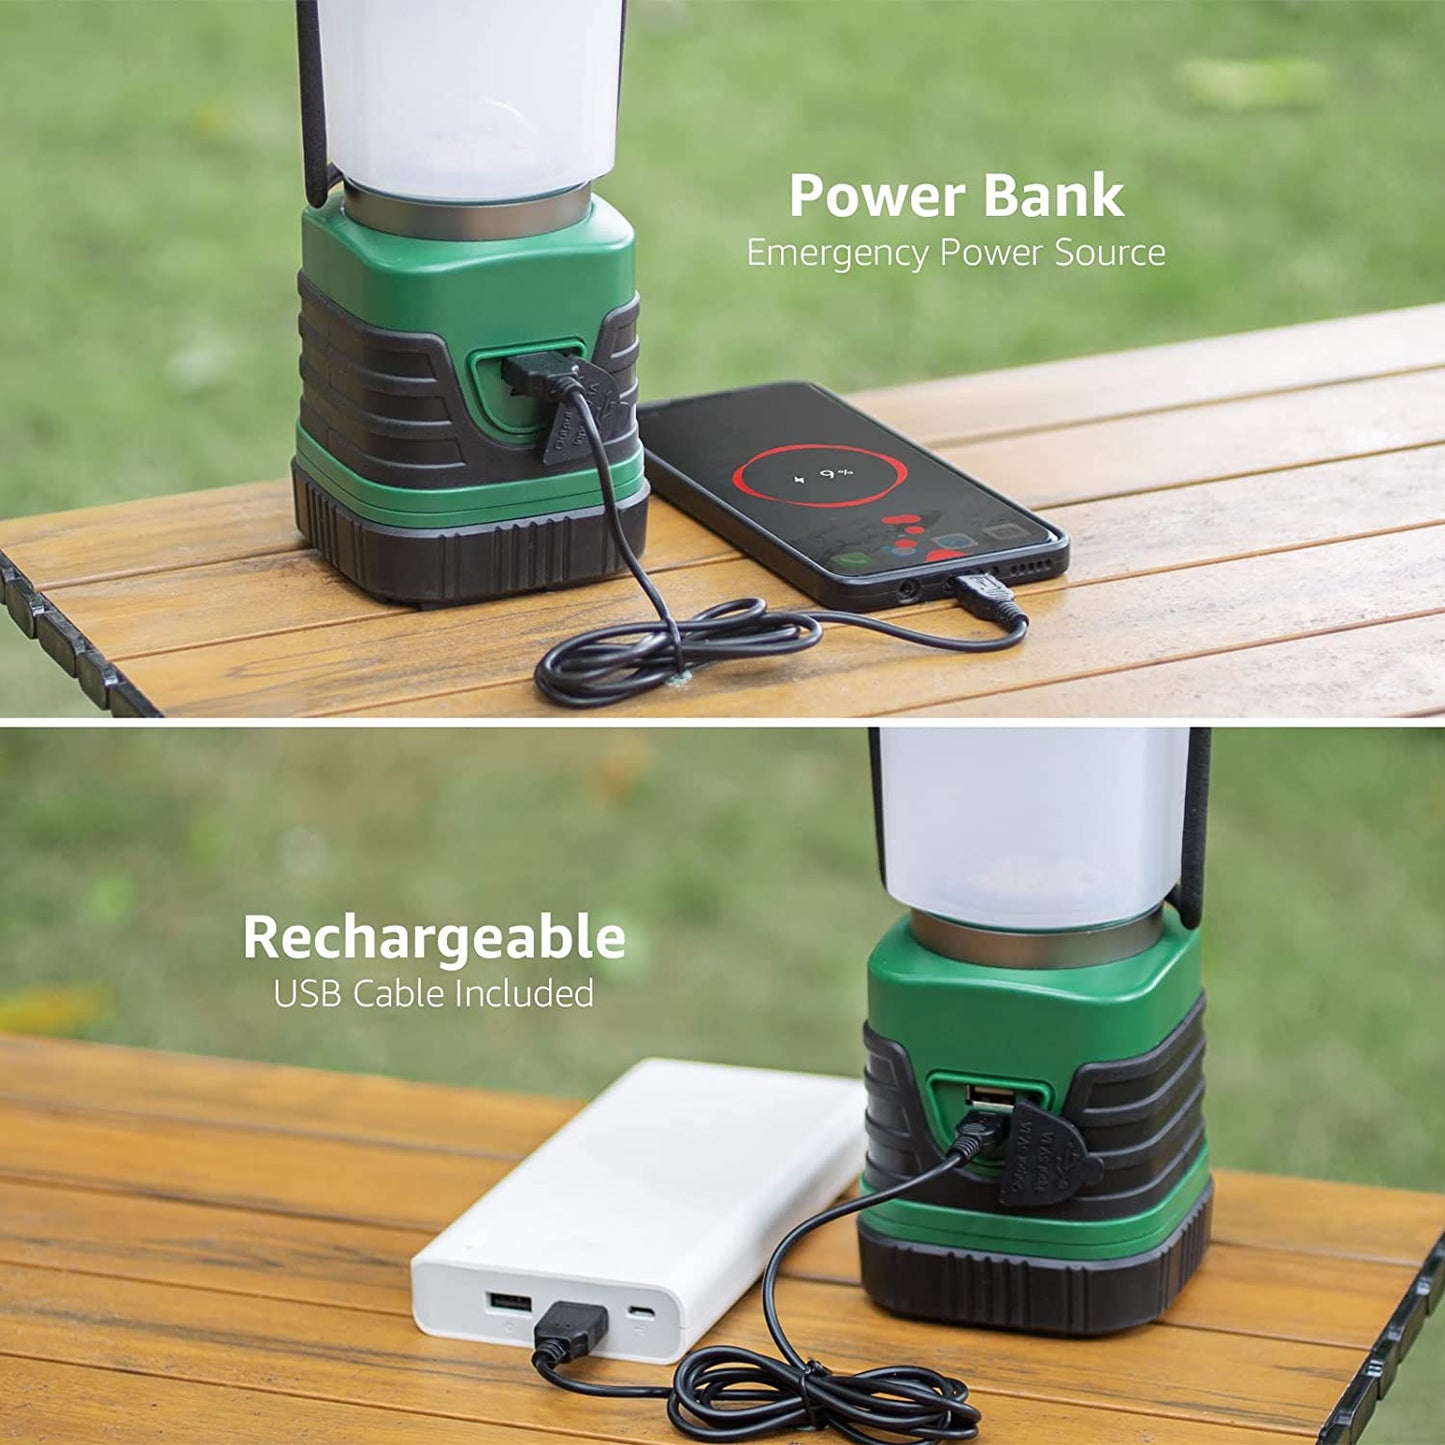 LE Rechargeable Camping Lantern